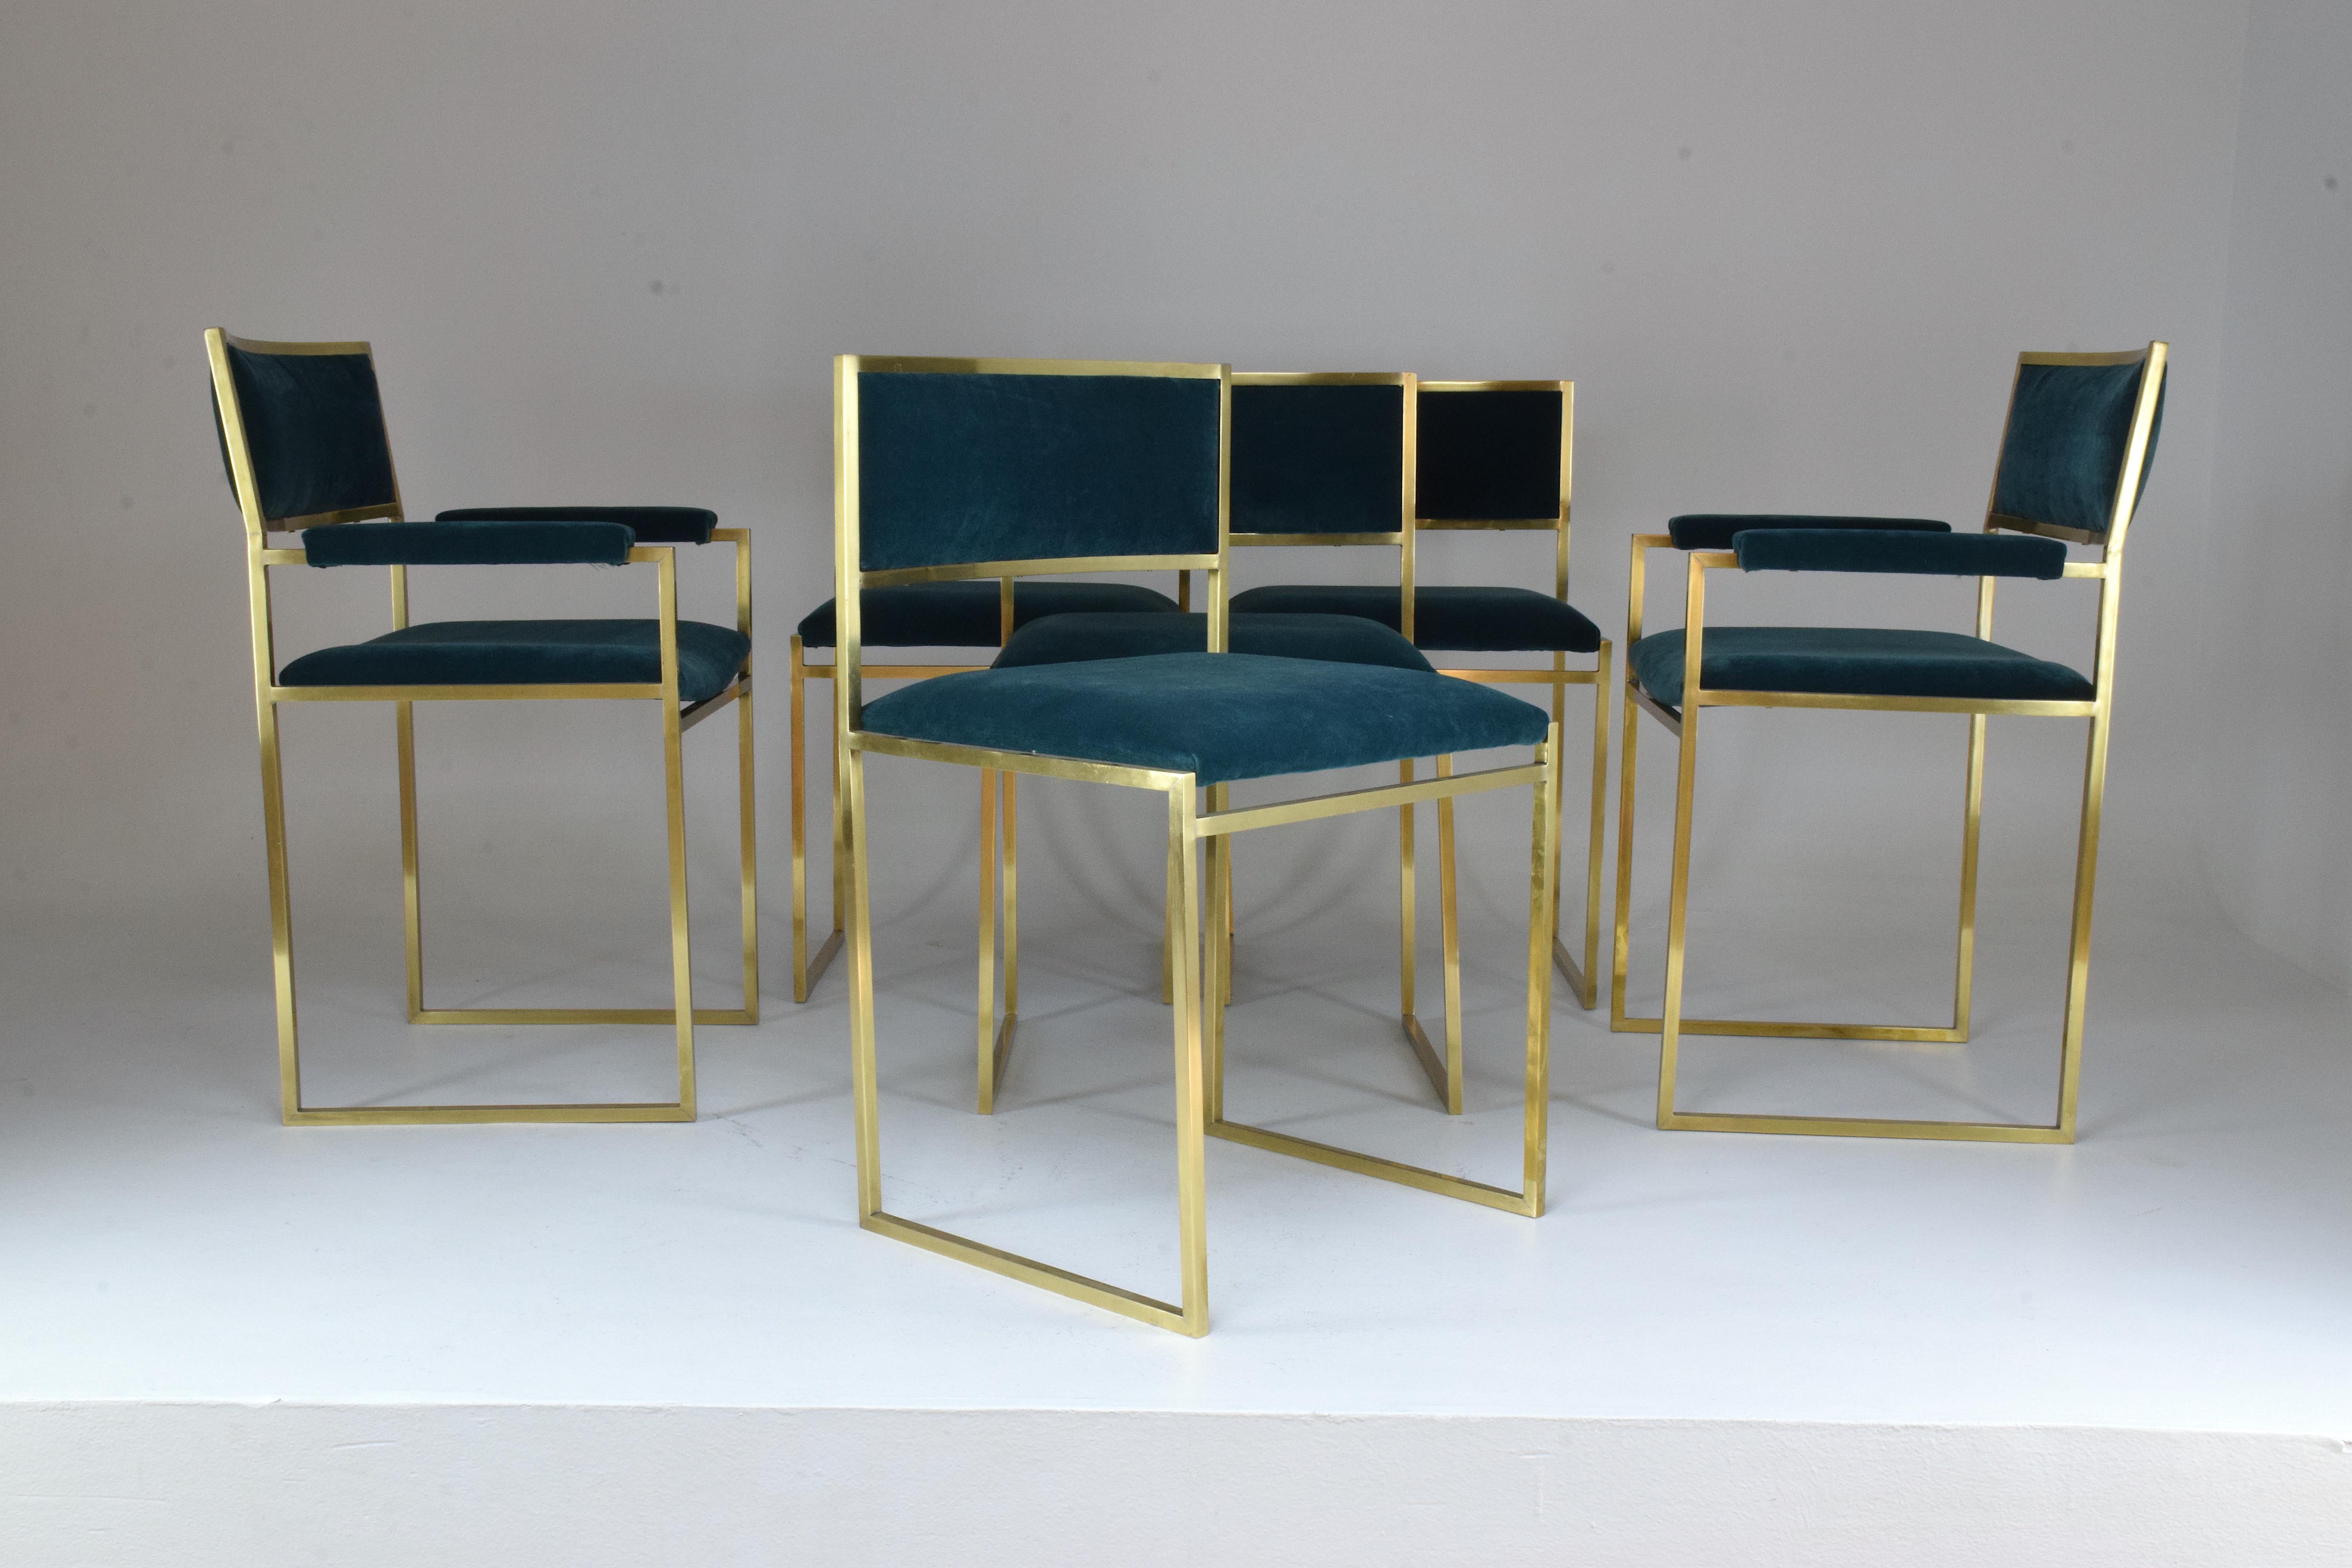 A set of 4 collectible chairs and 2 armchairs by the notable Italian designer Willy Rizzo in the 1970s. Each chair is designed with a polished brass geometric structure and green velvet upholstery.
Our assembly is rarer since it's composed of